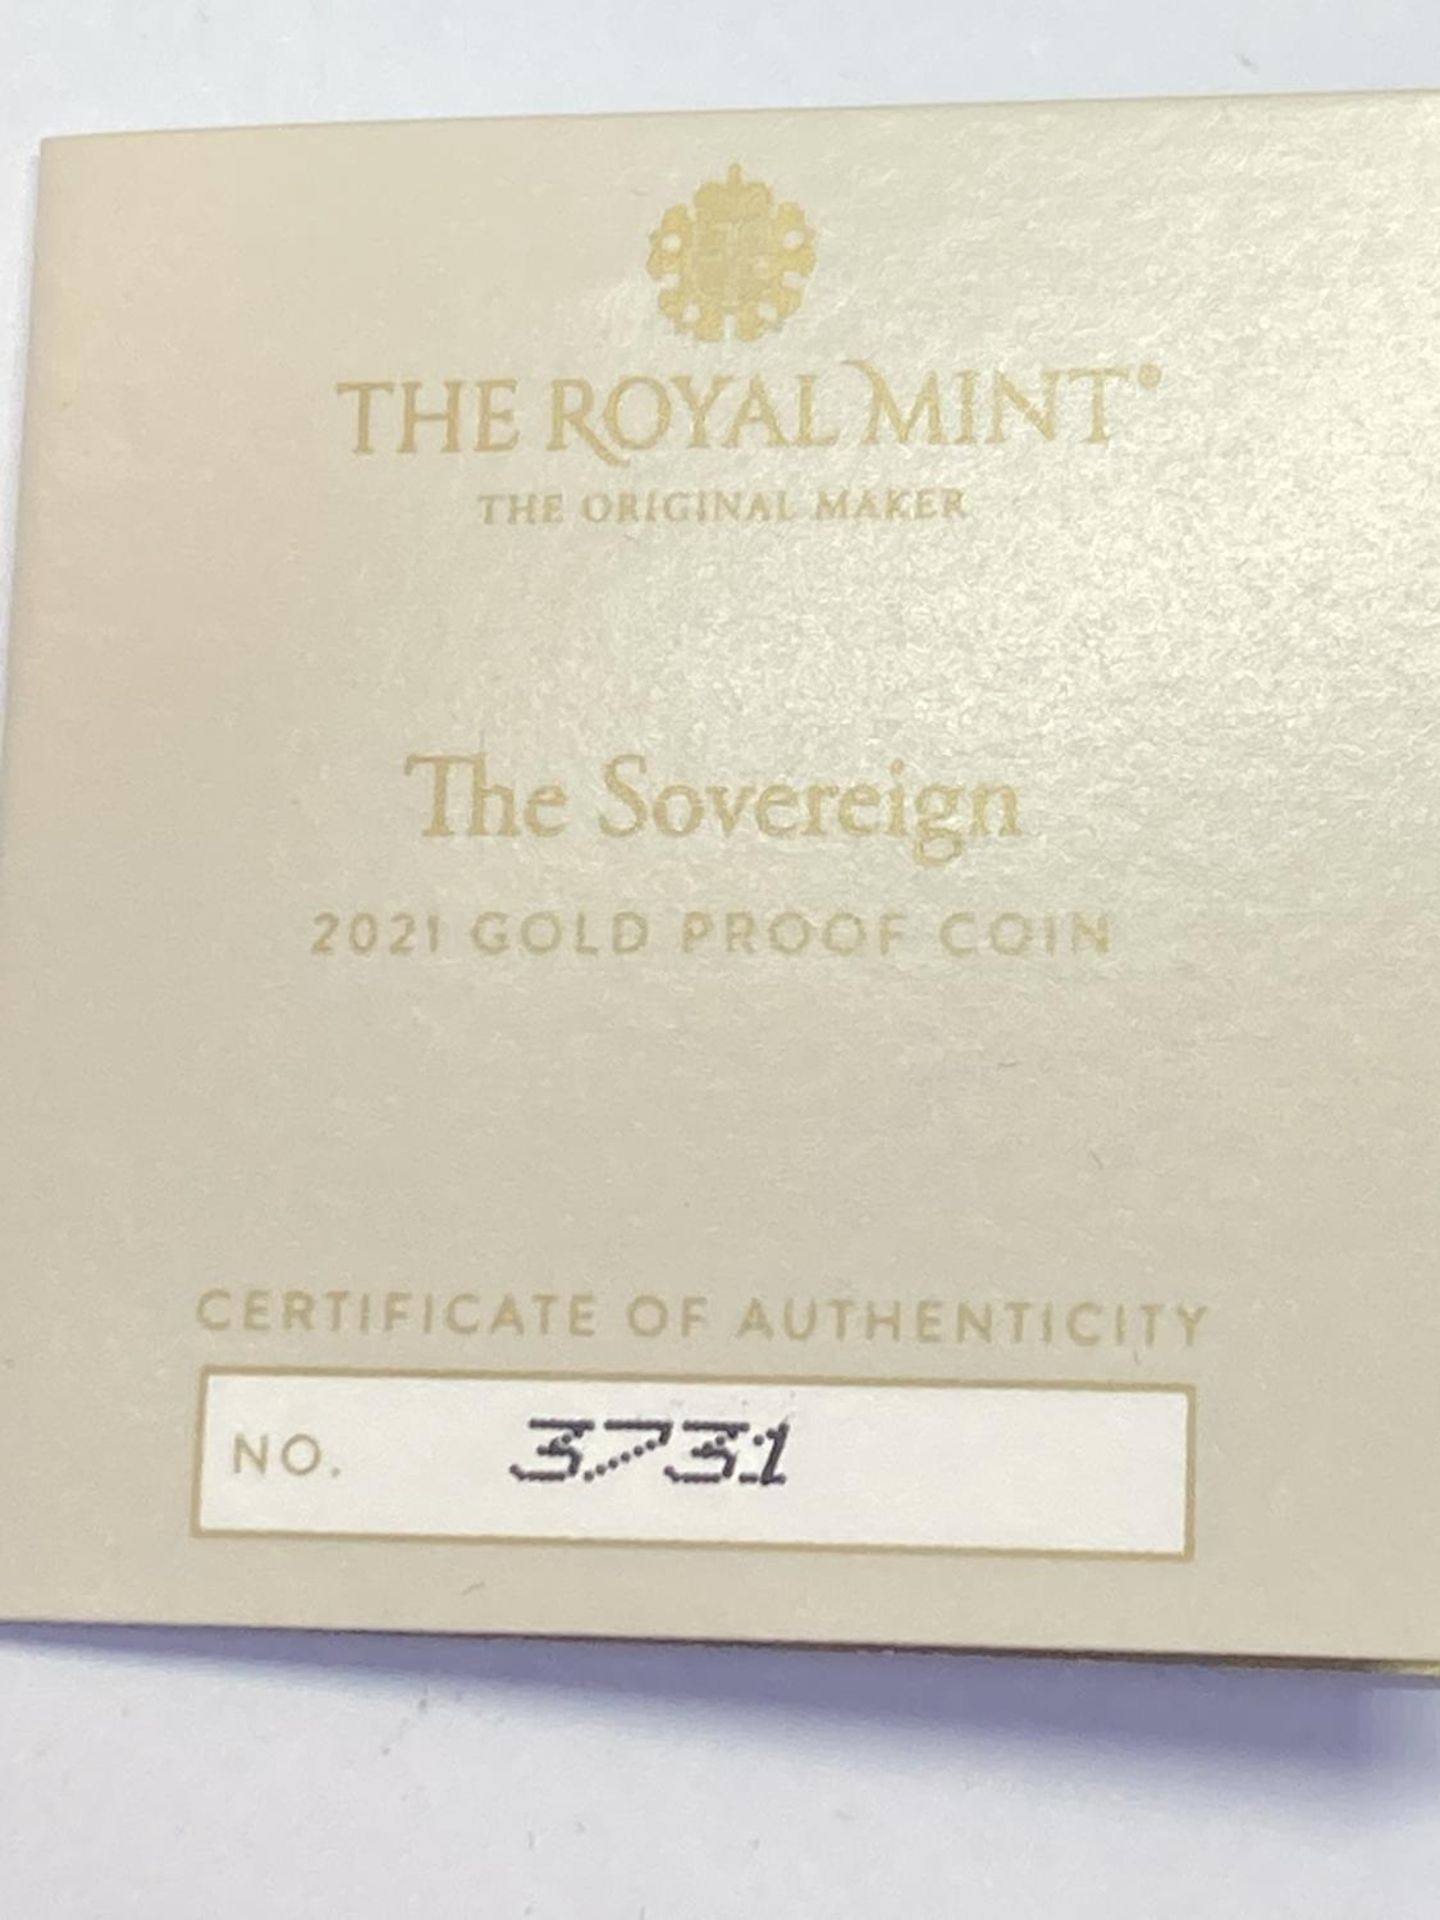 A 2021 THE SOVEREIGN GOLD PROOF LIMITED EDITION NUMBER 3,731 OF 7,995 IN A WOODEN BOXED CASE - Bild 4 aus 5